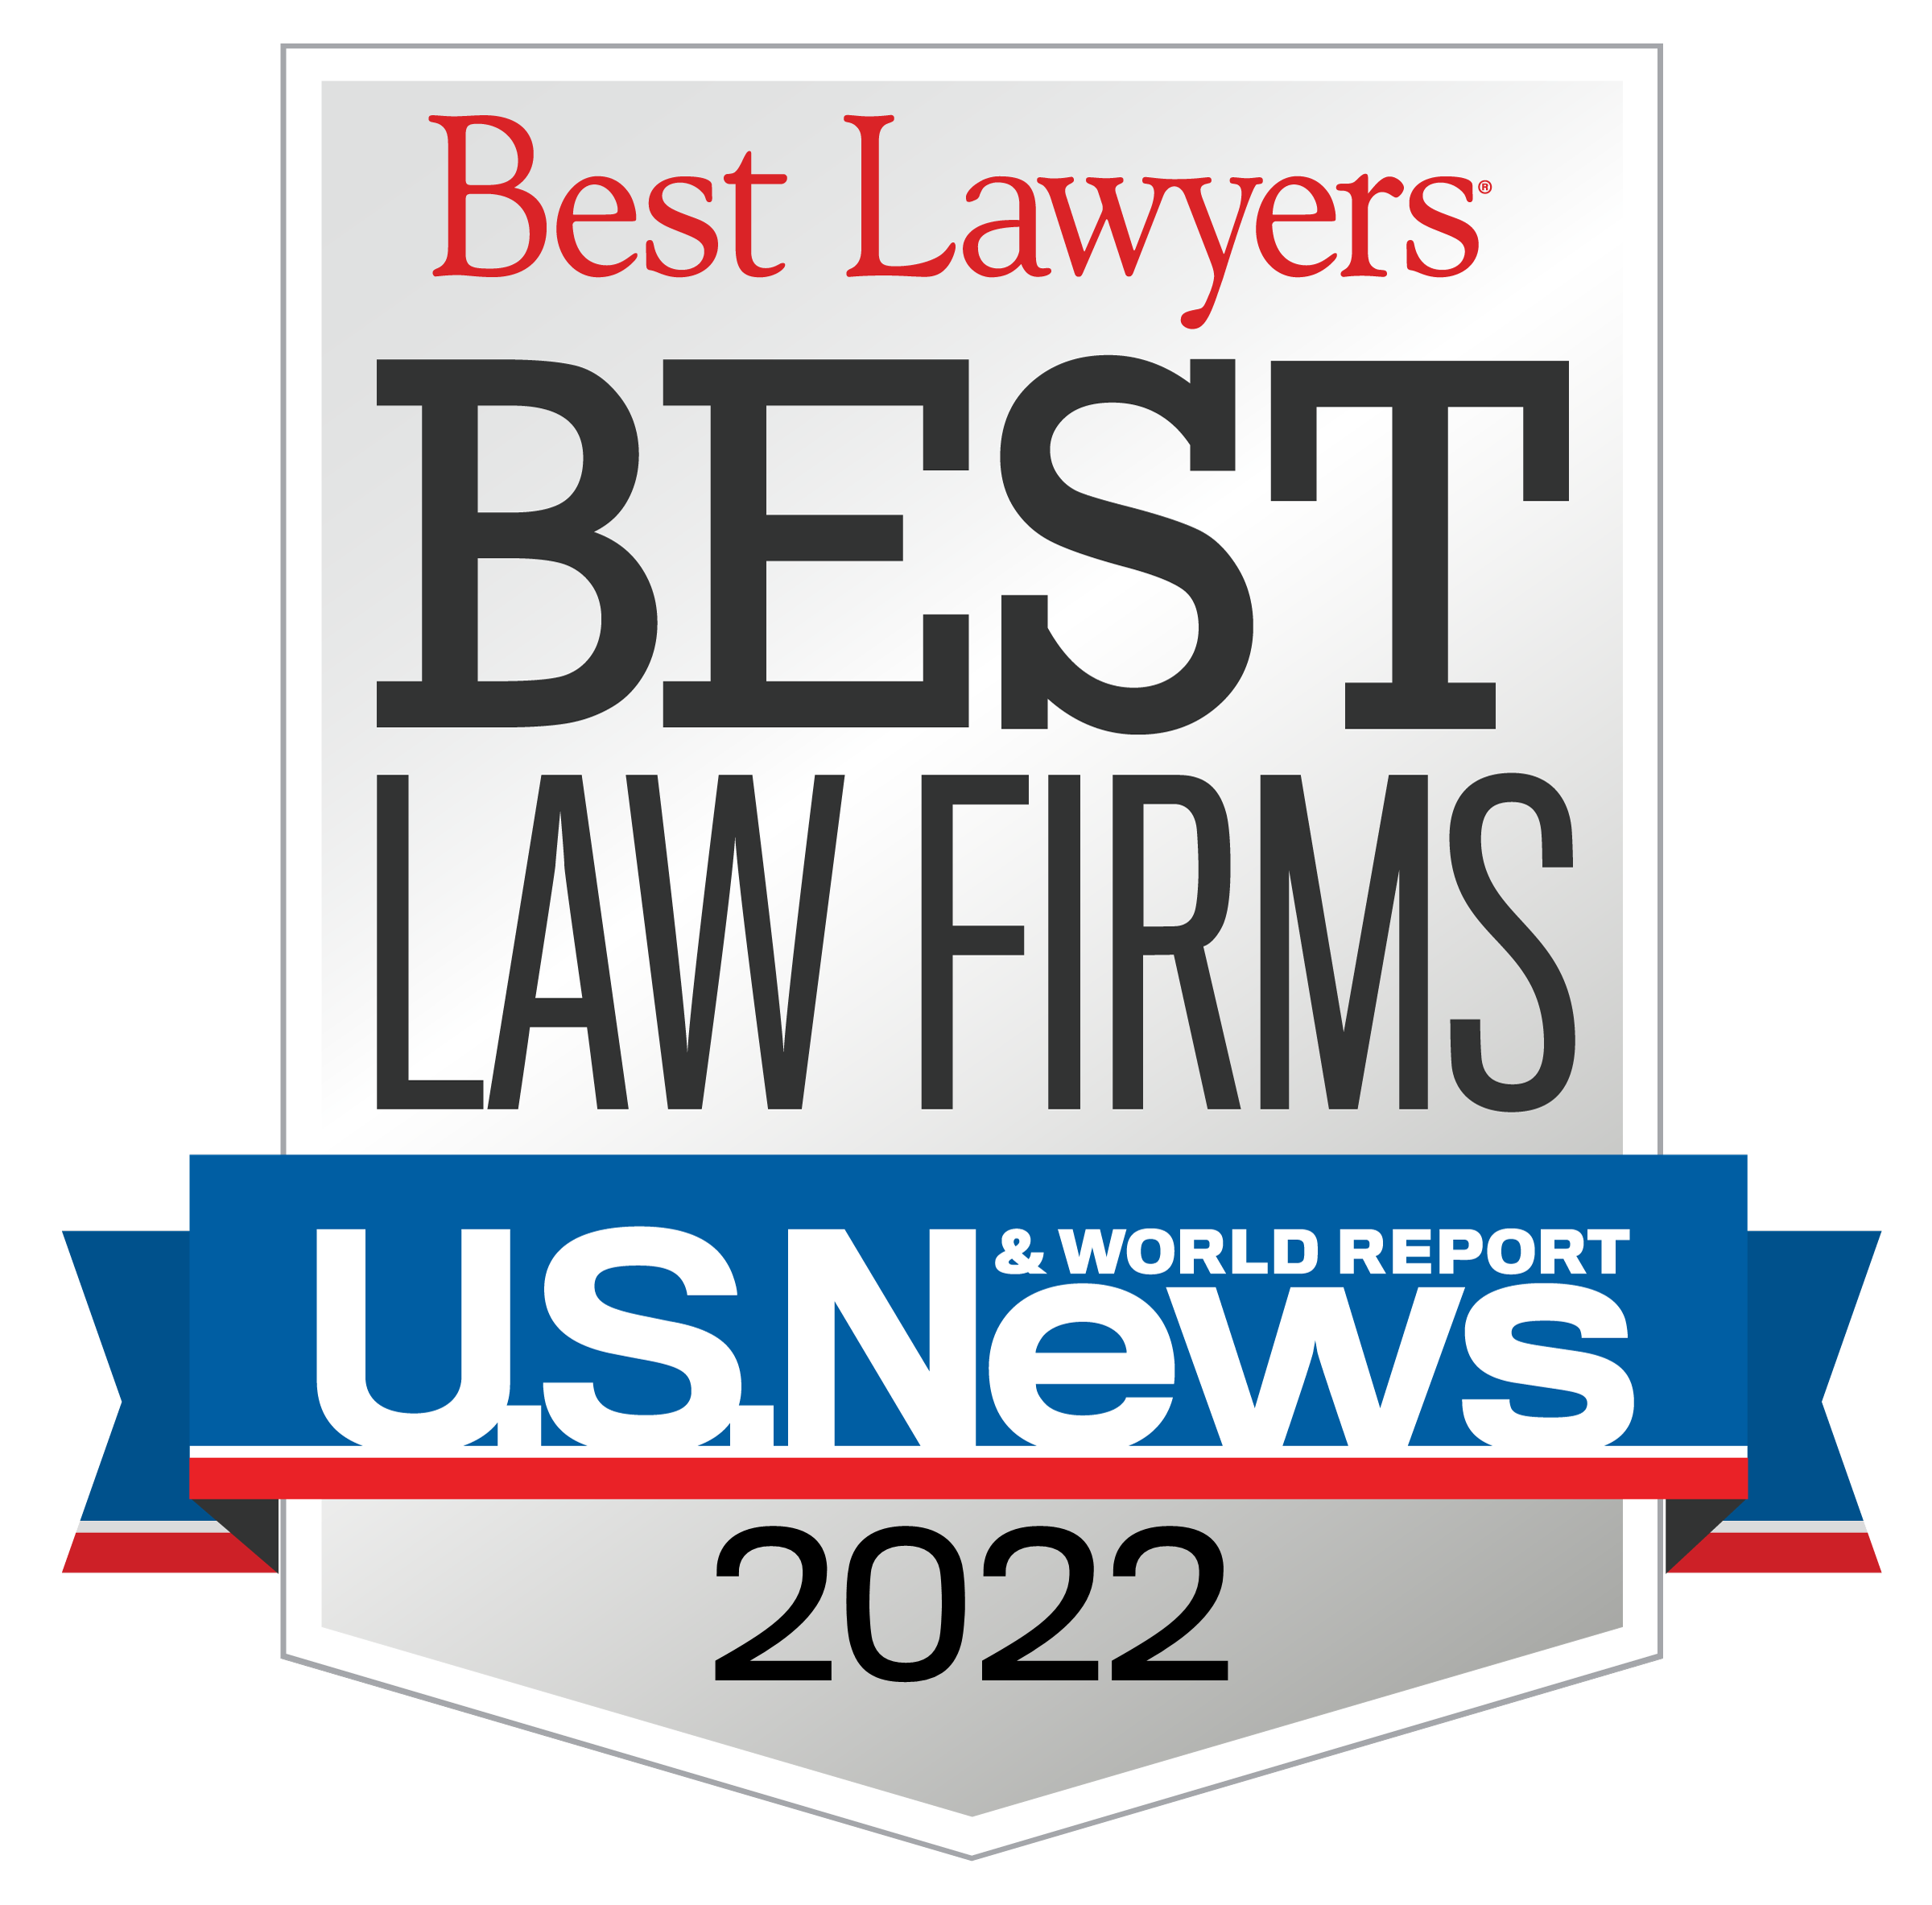 2022-hires-best-law-firms-logo